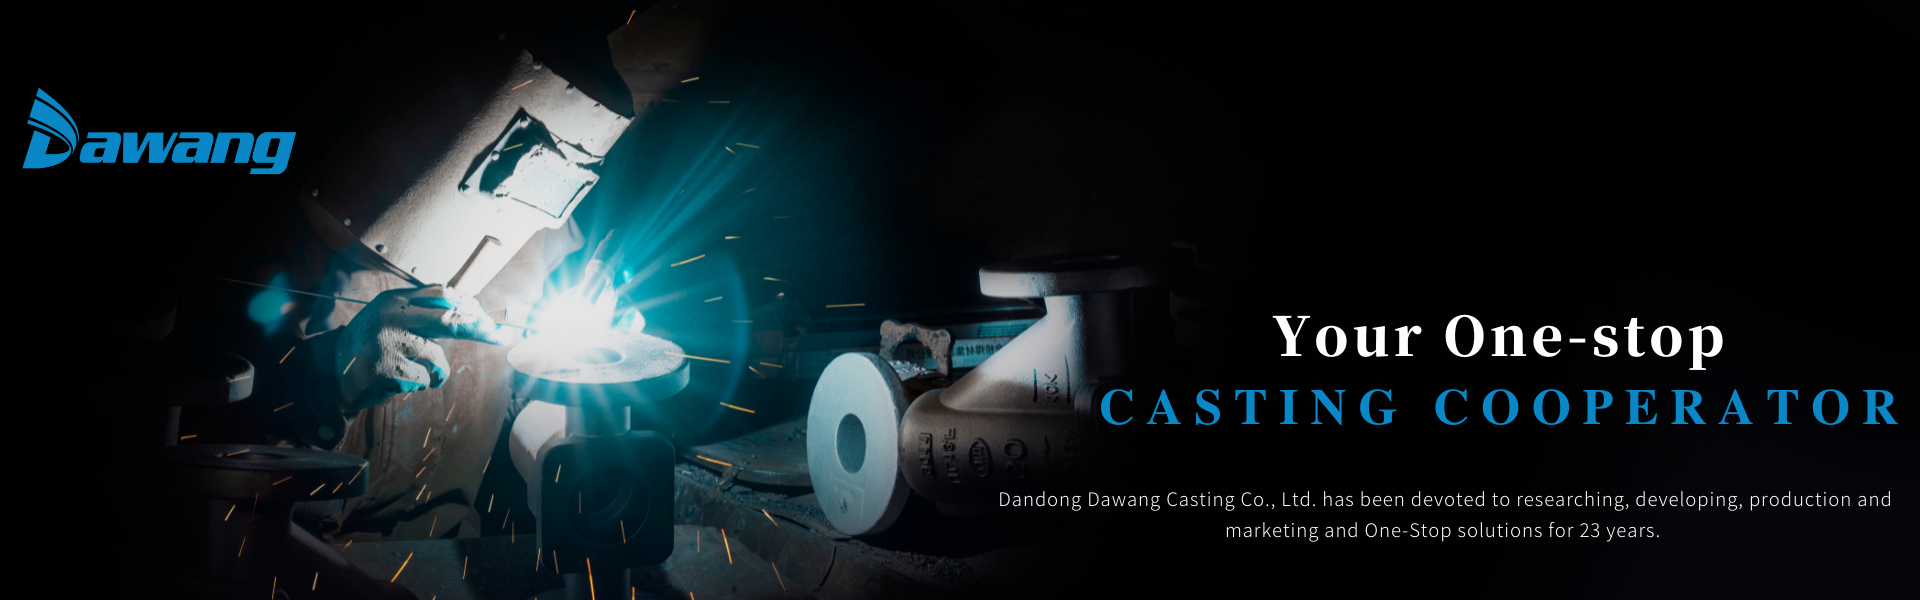 castings of various sizes